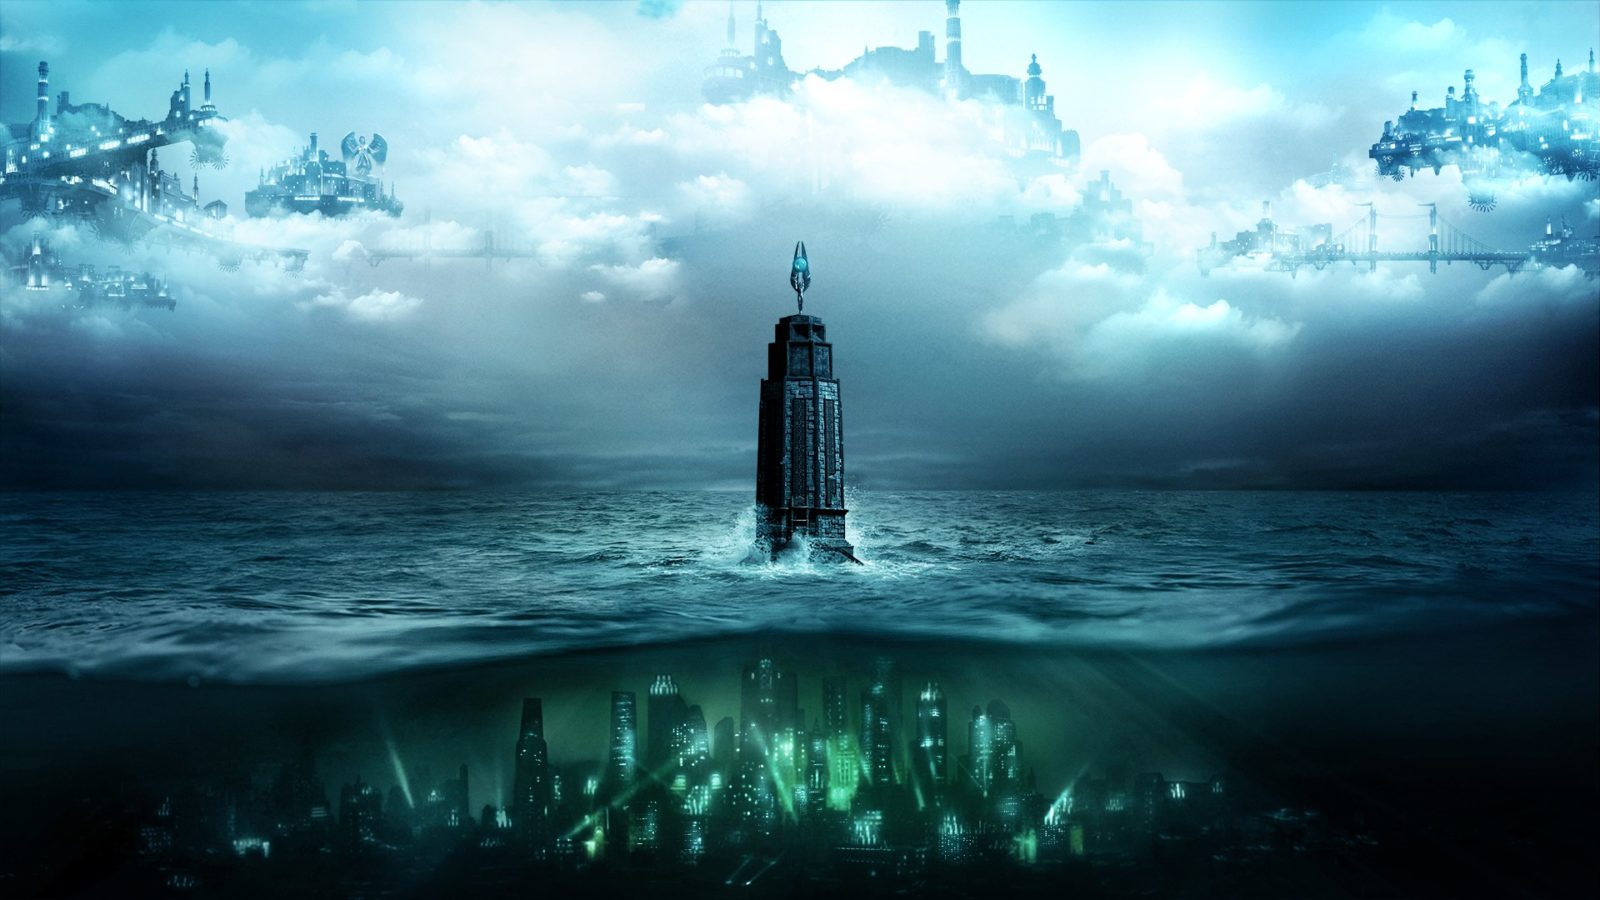 Play Bioshock The Collection for free thanks to this brief